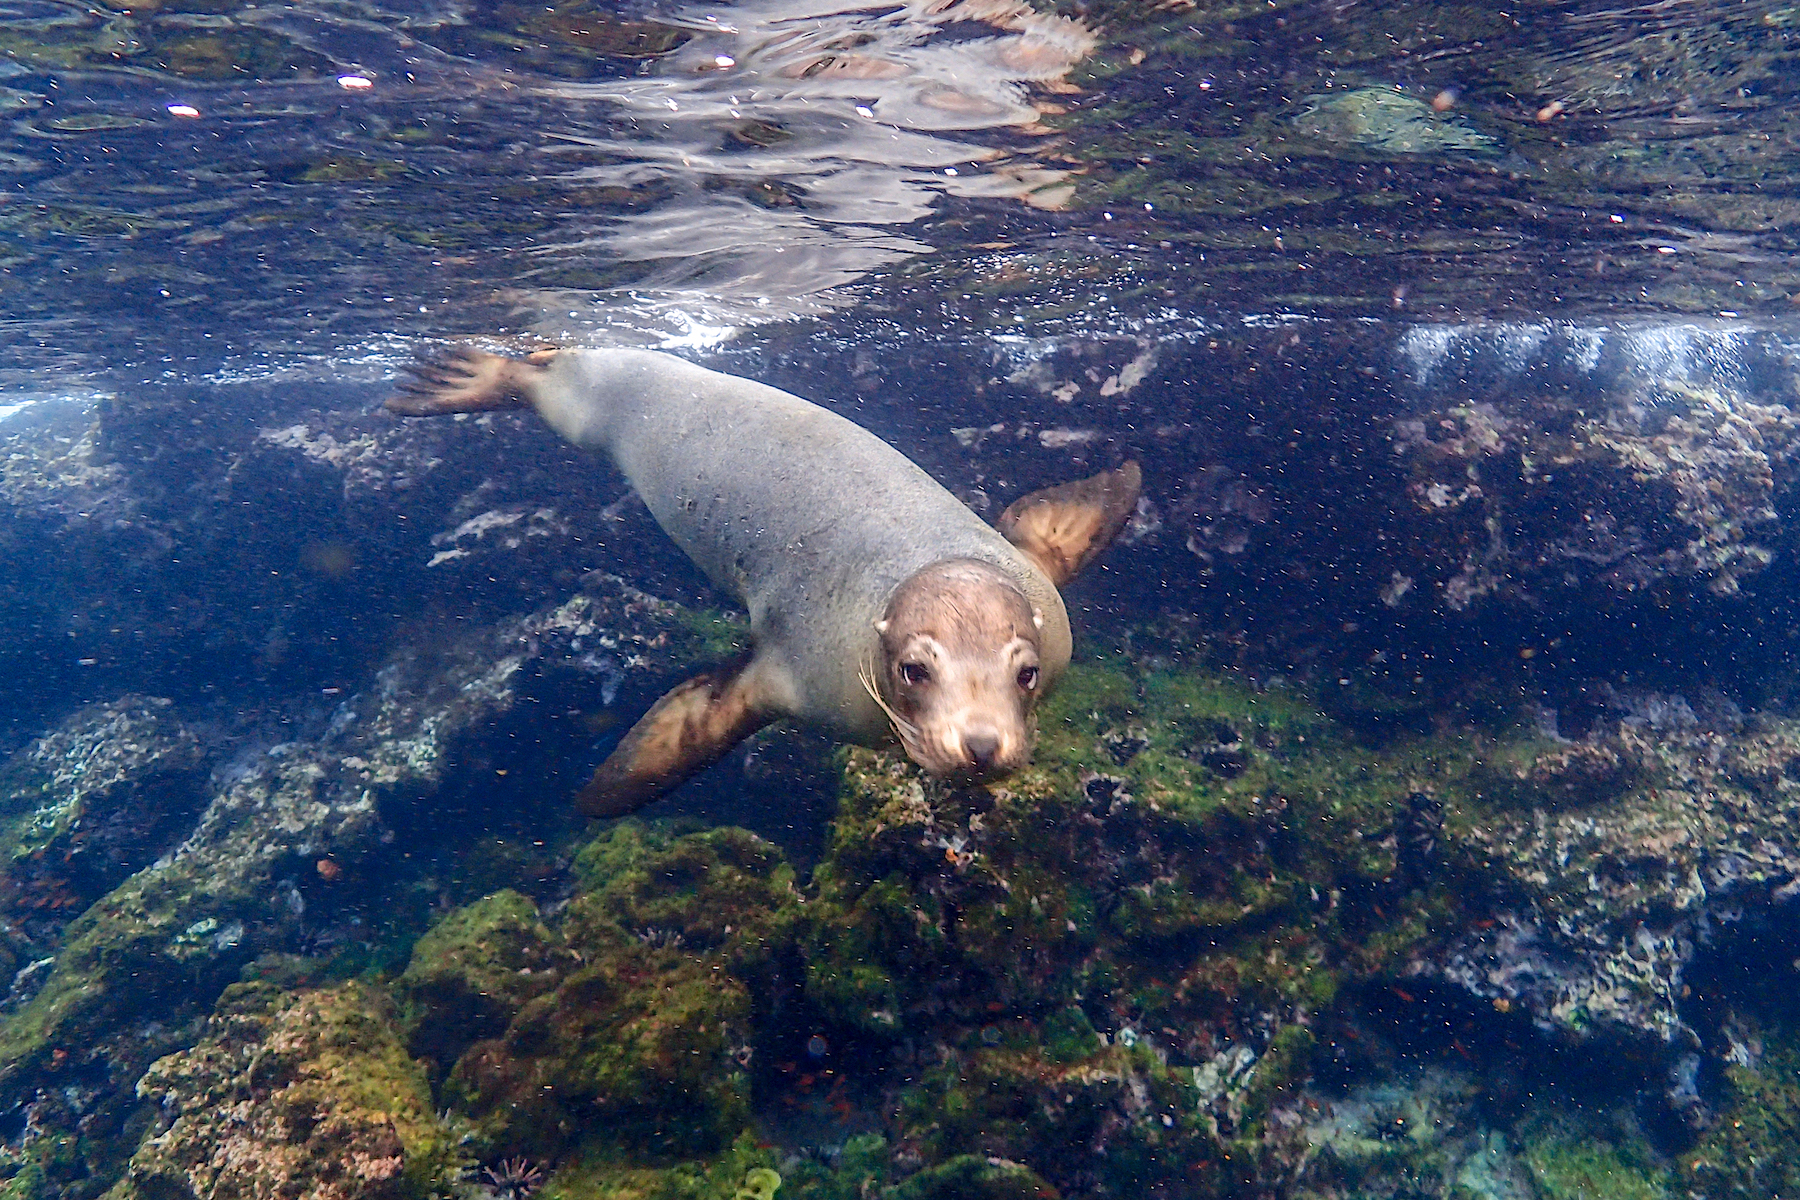 Even using a compact underwater camera, you can have a lot of fun photographing Galapagos sealions underwater (image by Inger Vandyke)